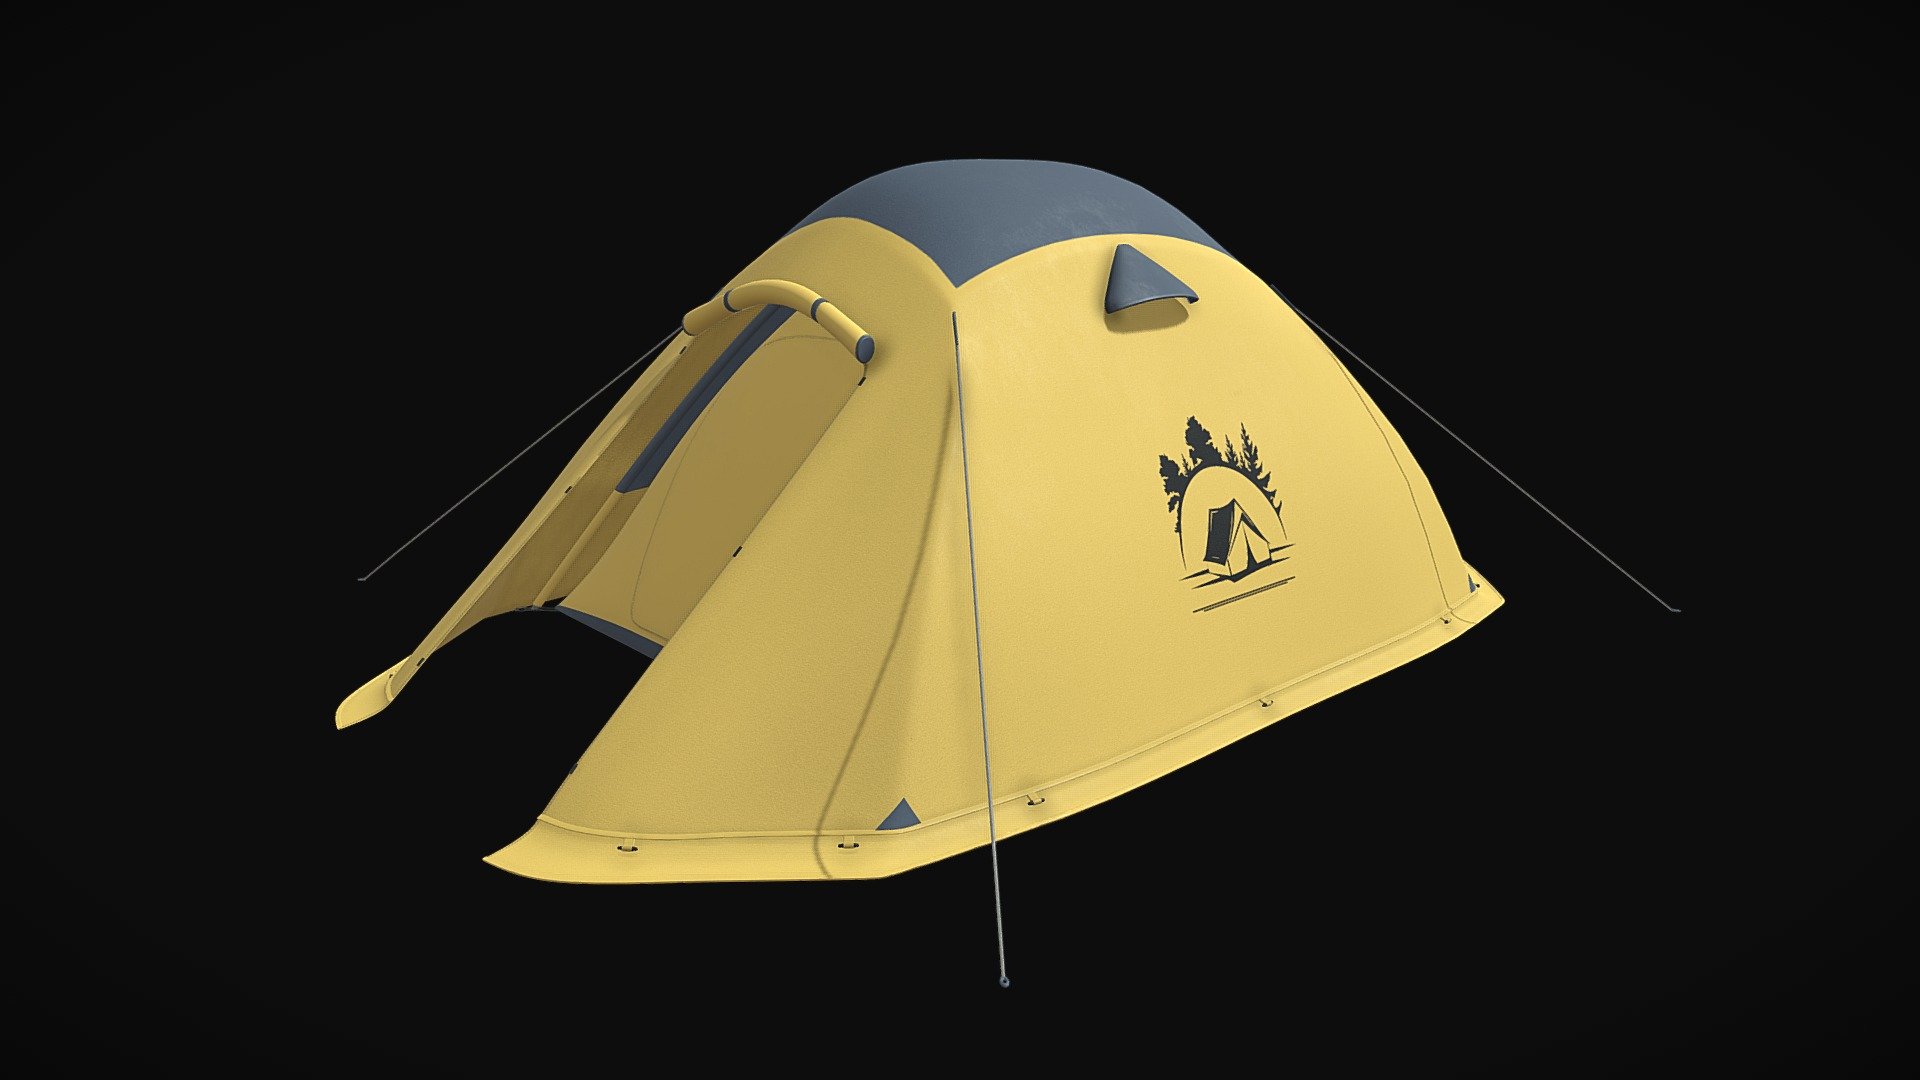 This is a mid poly model of camping tent. This model is perfect for anything from presentations to game dev. Textures maps and UV data are included. There are three texture set with texturemaps for metal/rough setup. The model is UV mapped and unwrapped with no overlapping UVs. The model has clean geometry and topology and has 82925 polys. This model was made in Maya and Substance.

PBR textures 4k .png / Base Color / AO / Normal / Roughnes

Note: The product comes without scene, camera or lights, include only 3dmodel.

File formats available on request:

FBX Maya Blender OBJ Cinema4D STL

If you have any questions feel free to message me! Hope you like it! Also check out my other models, just click on my user name to see complete gallery 3d model